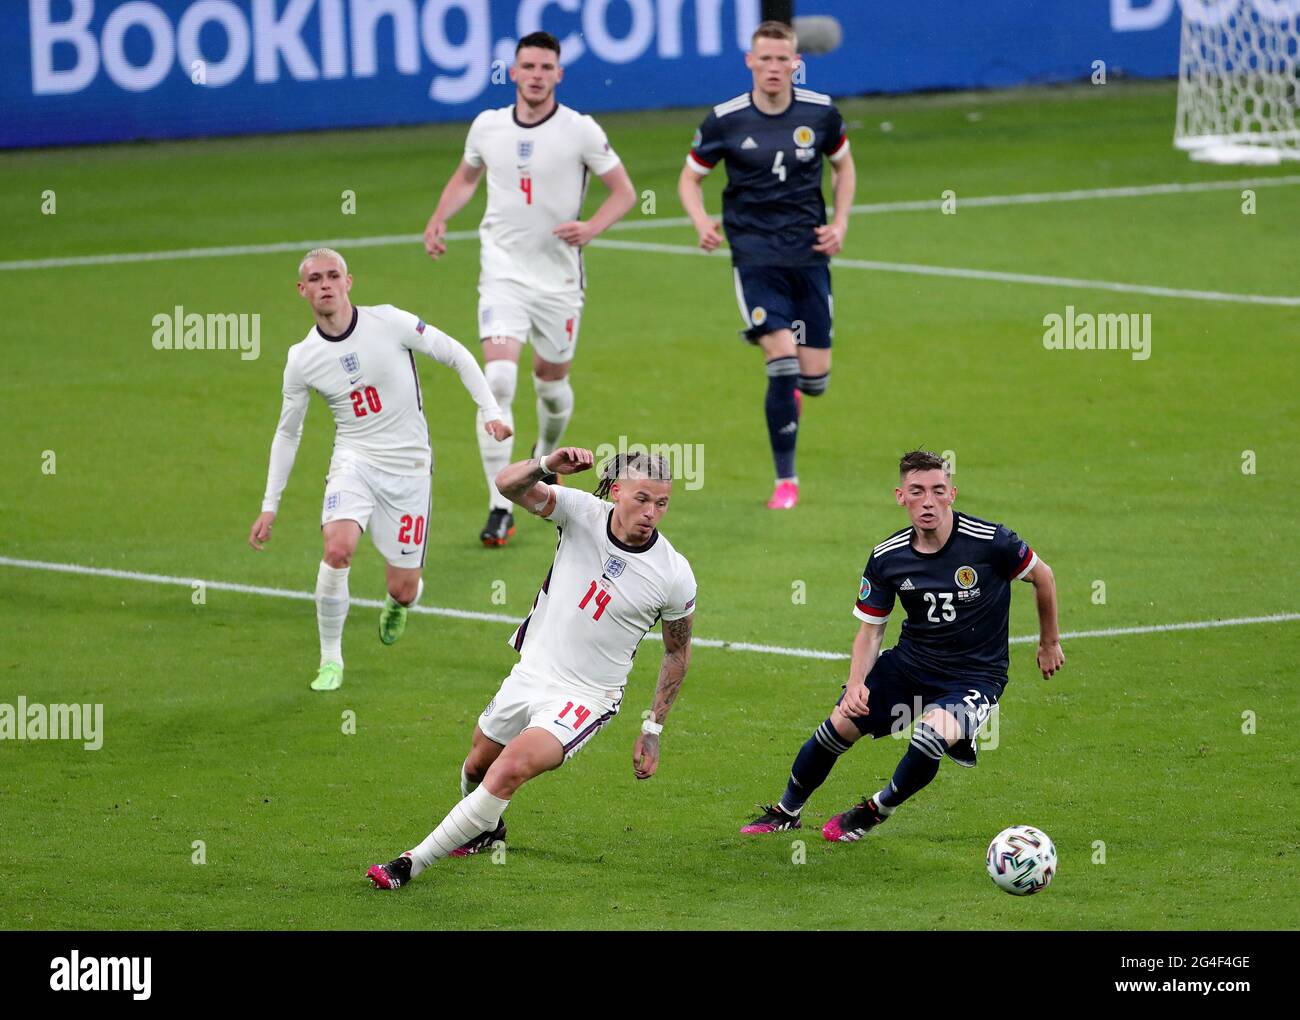 RICE,MCTOMINAY,FODEN,PHILLIPS,GILMOUR, ENGLAND V SCOTLAND, 2021 Stock Photo